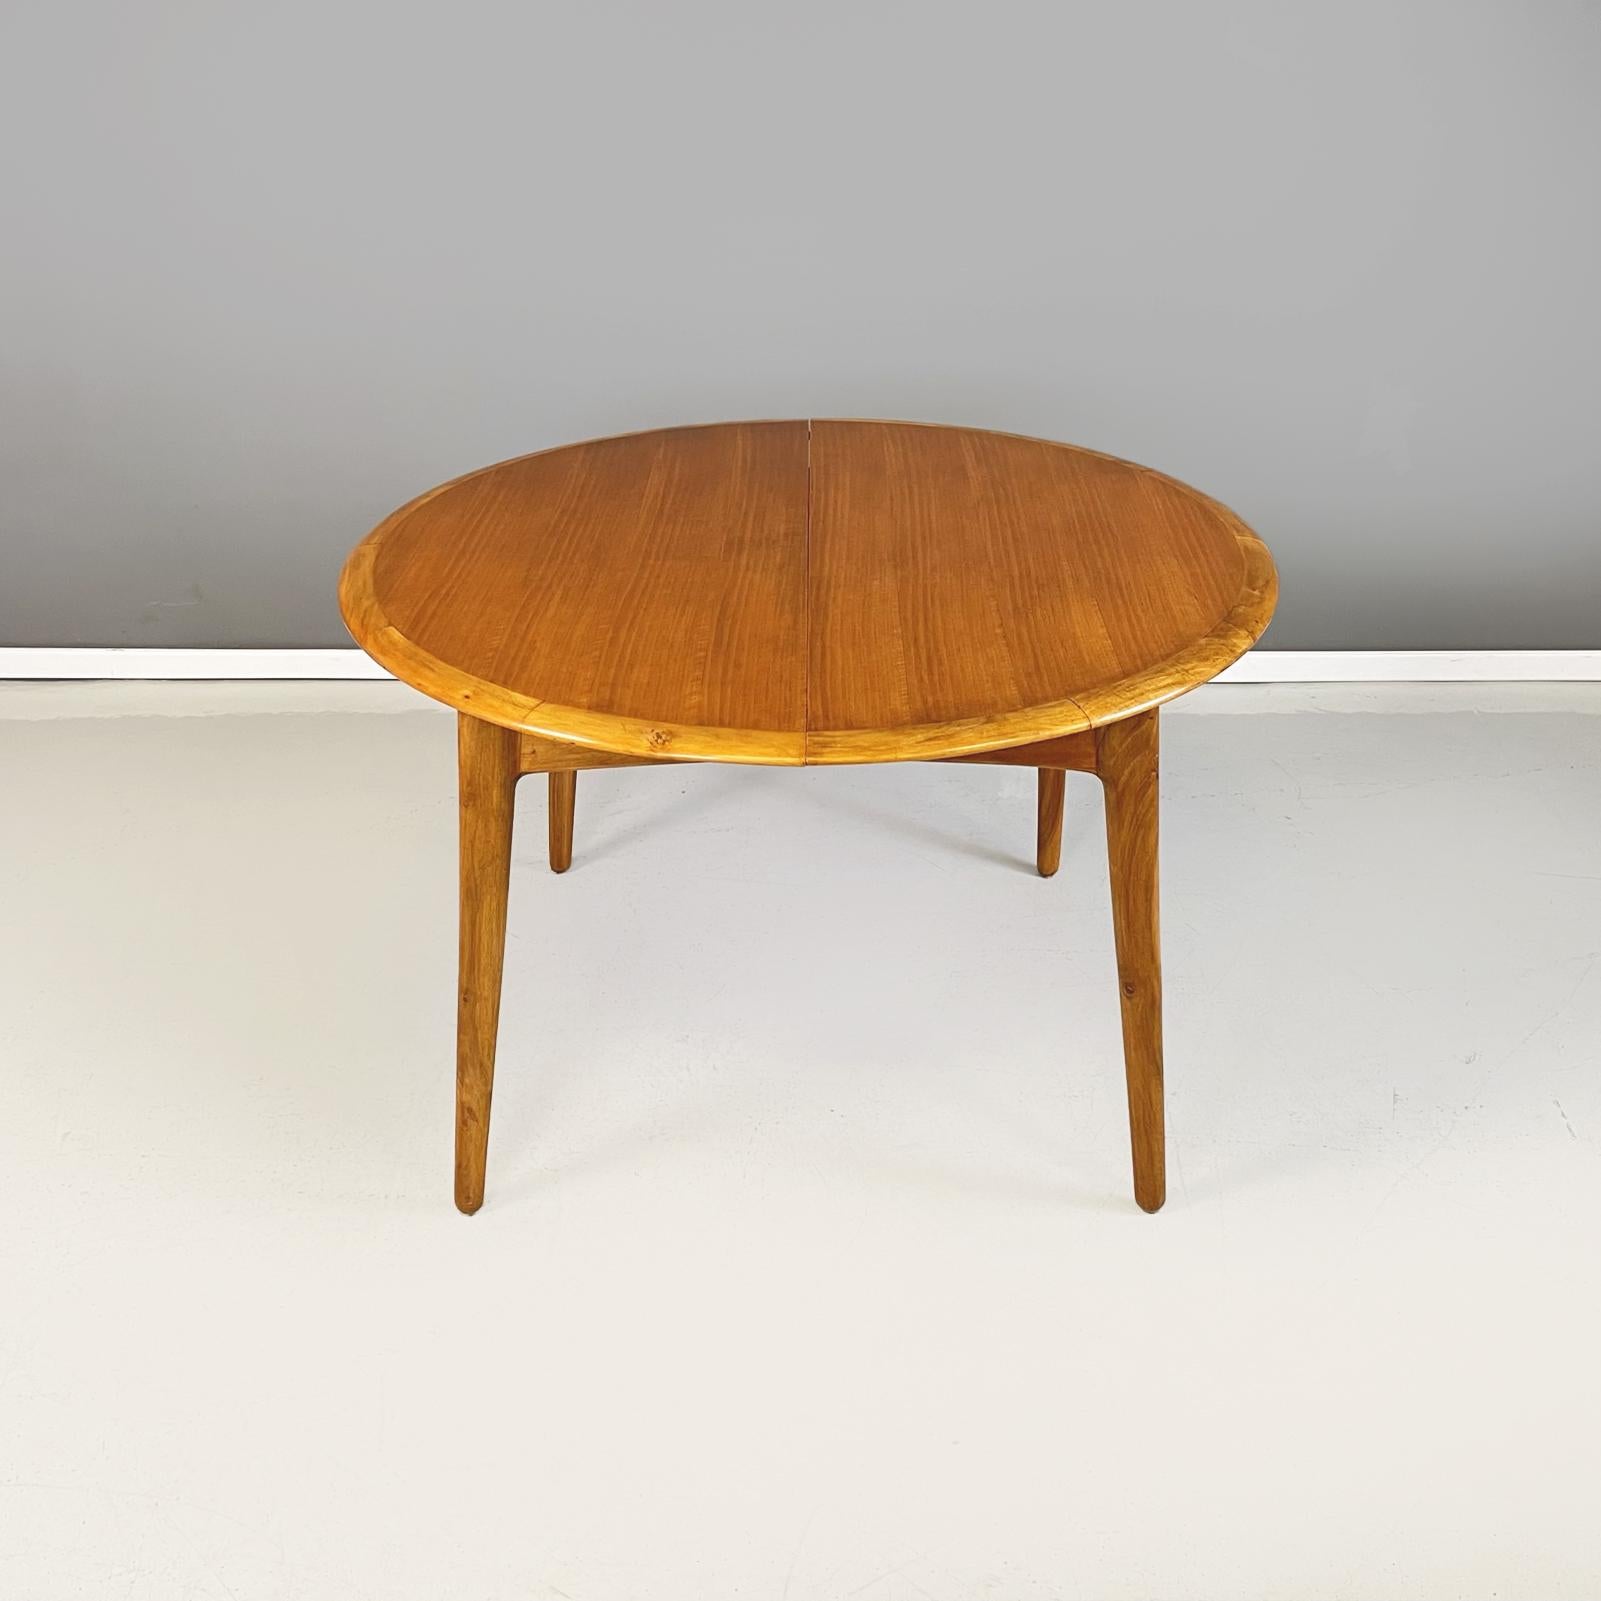 North Europa Midcentury Oval Round Wooden Dining Table with Extensions, 1960s For Sale 1